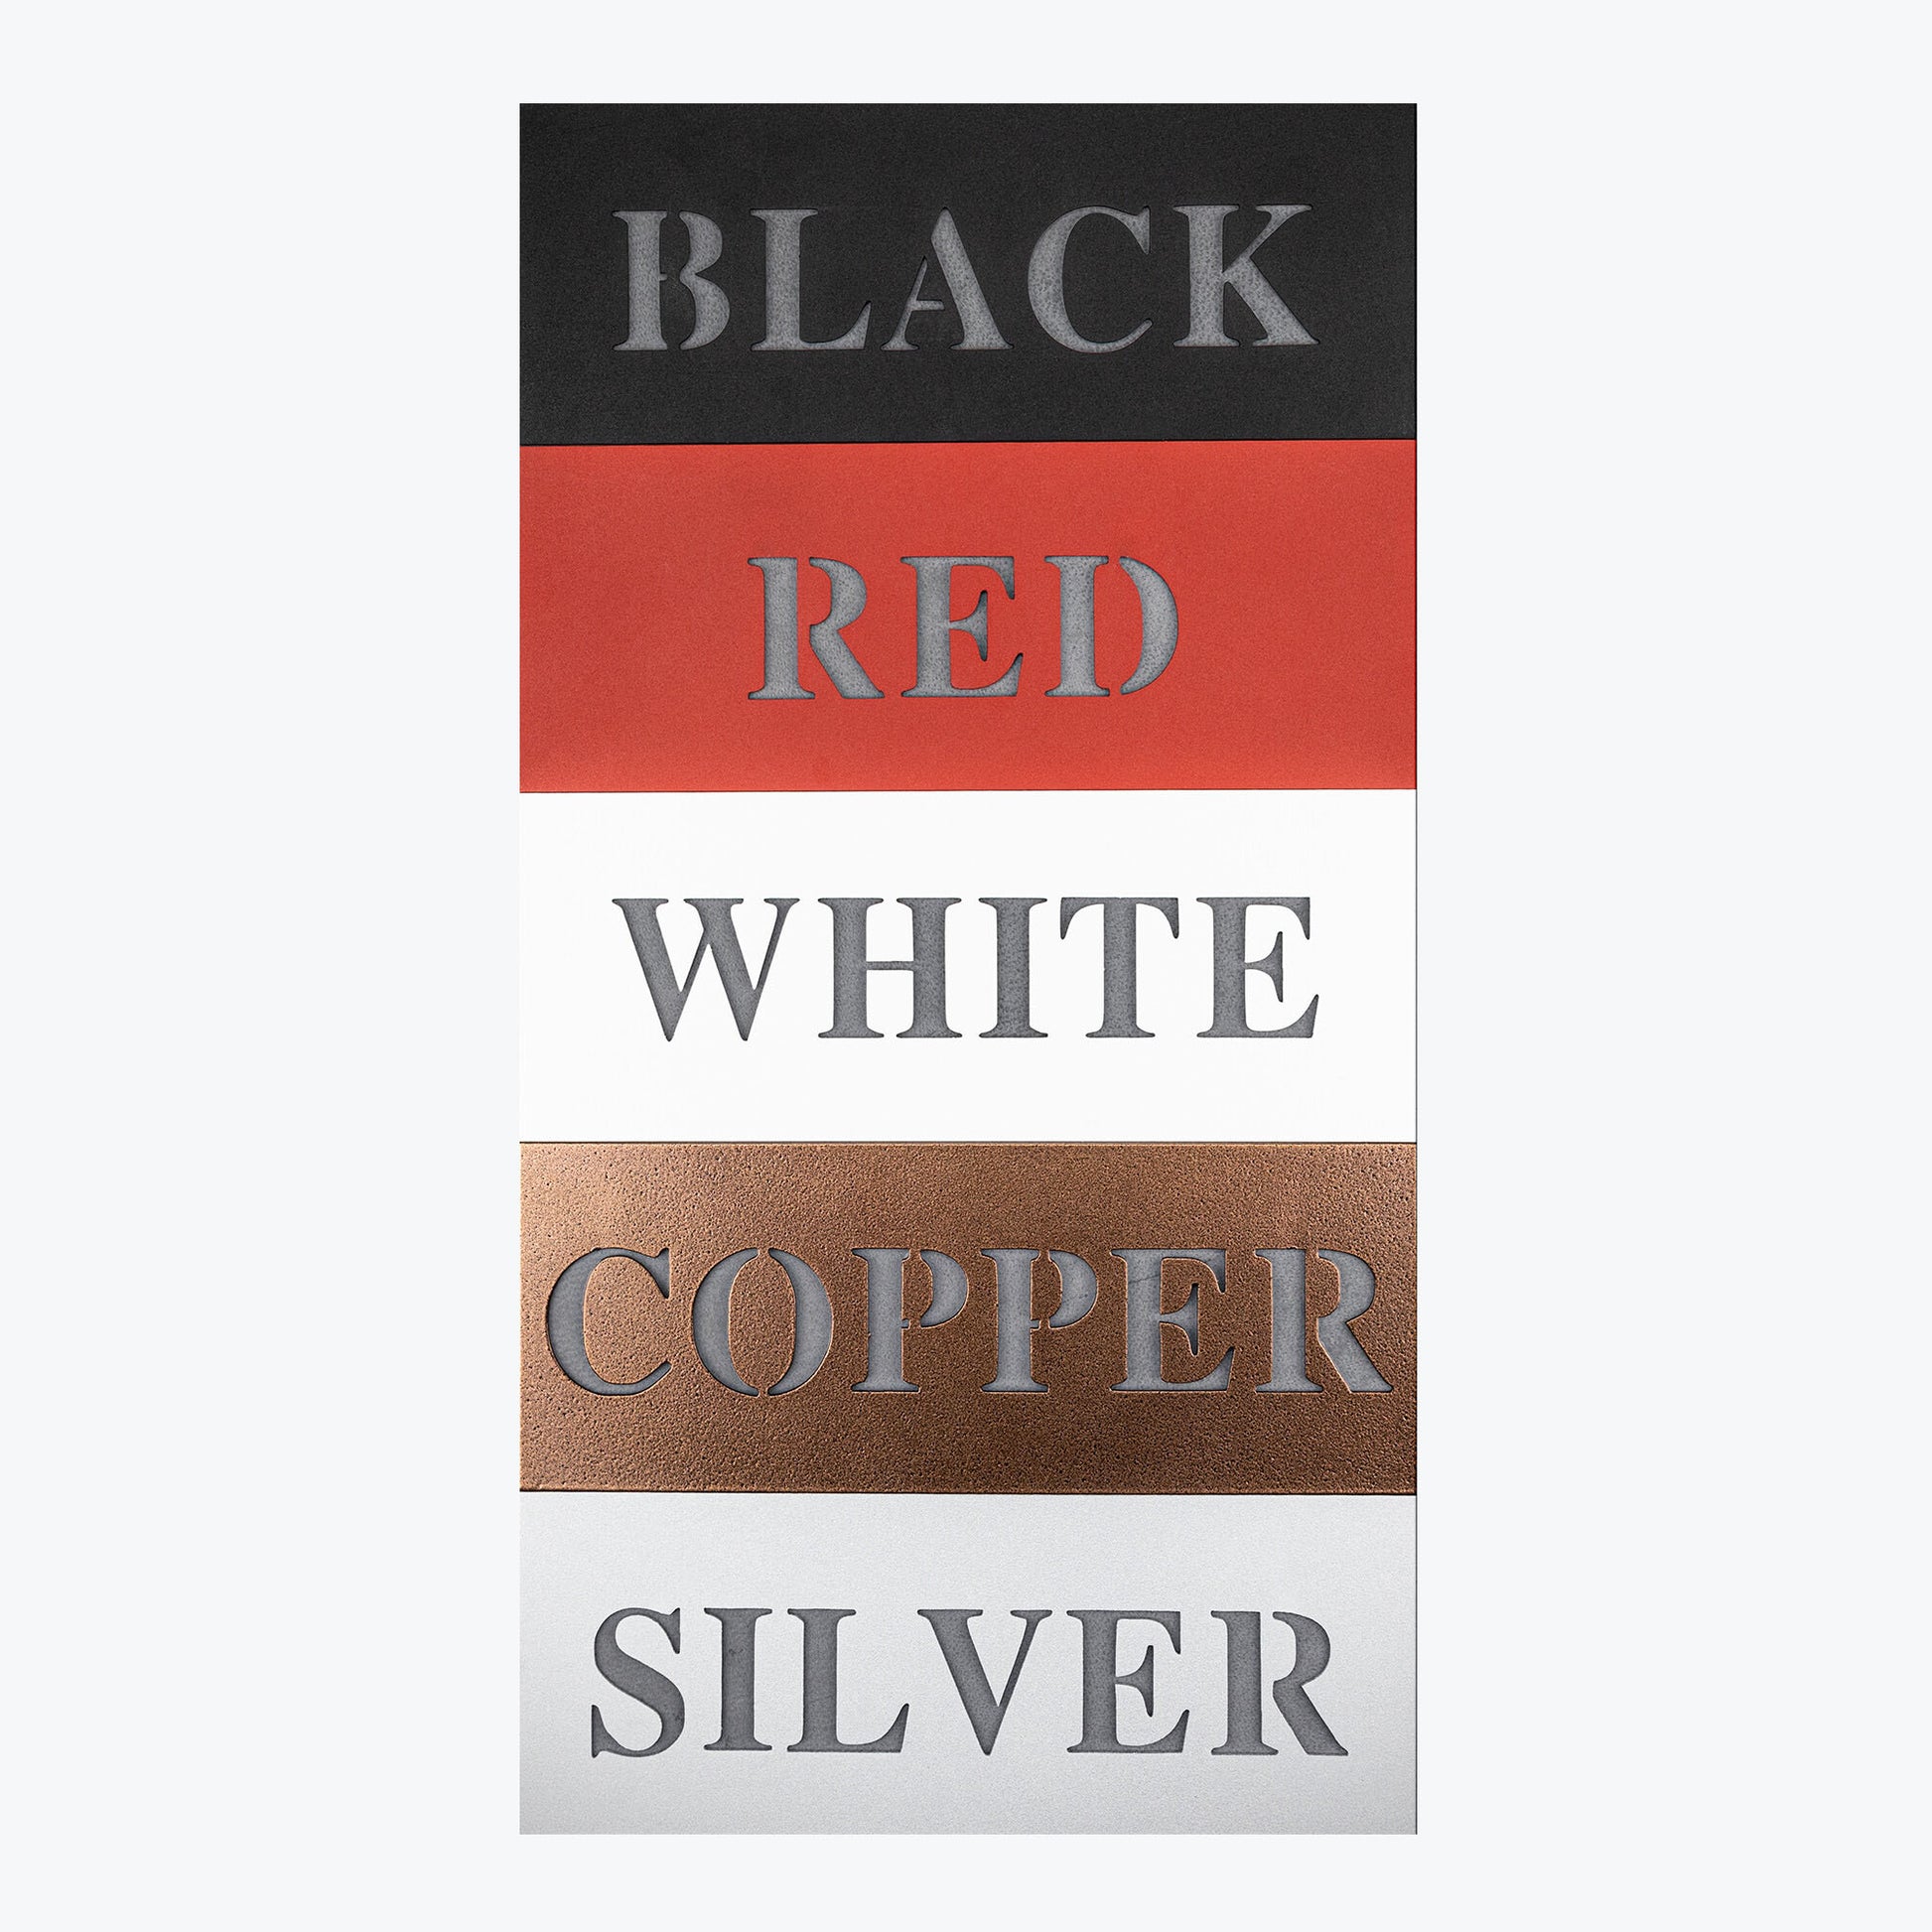 Knit Love Metal Wall Art Color Options Black Red White Copper Silver